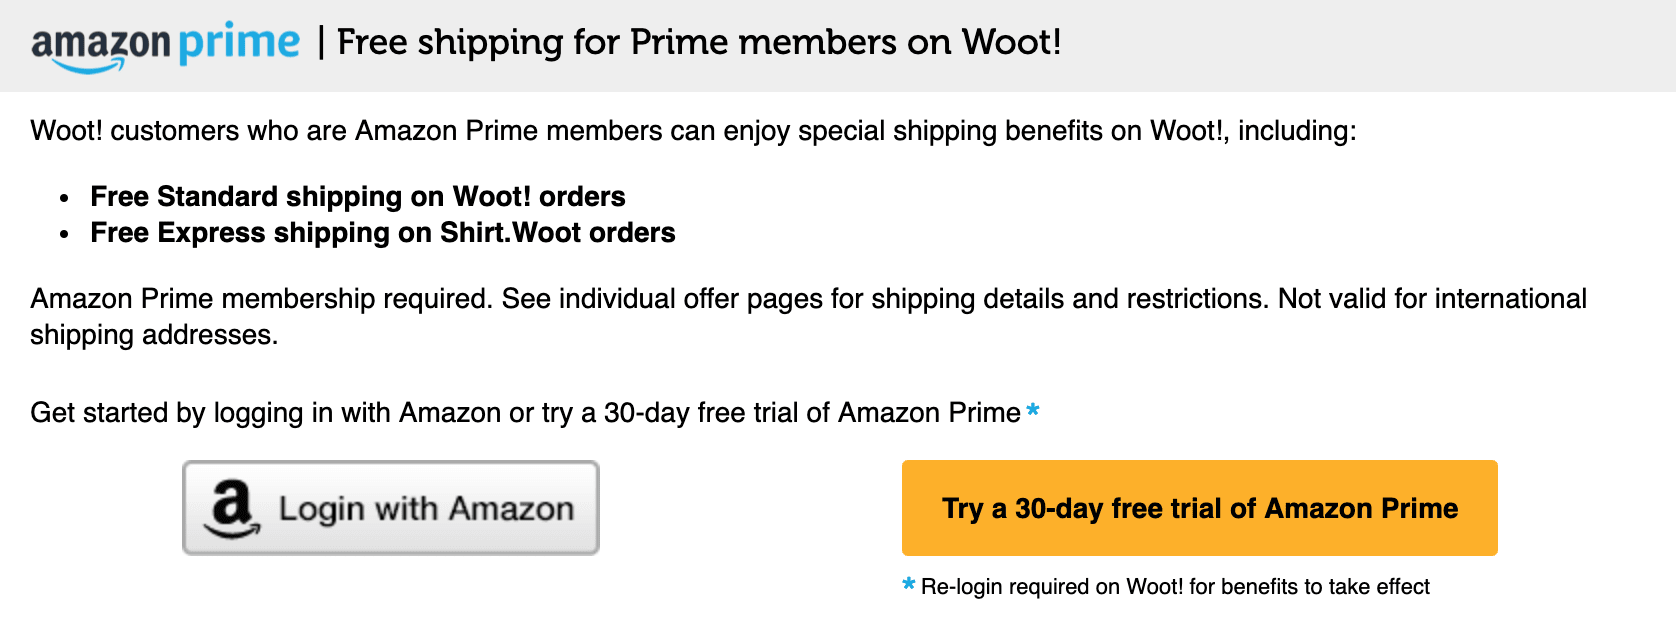 Amazon prime free shipping on Woot purchases